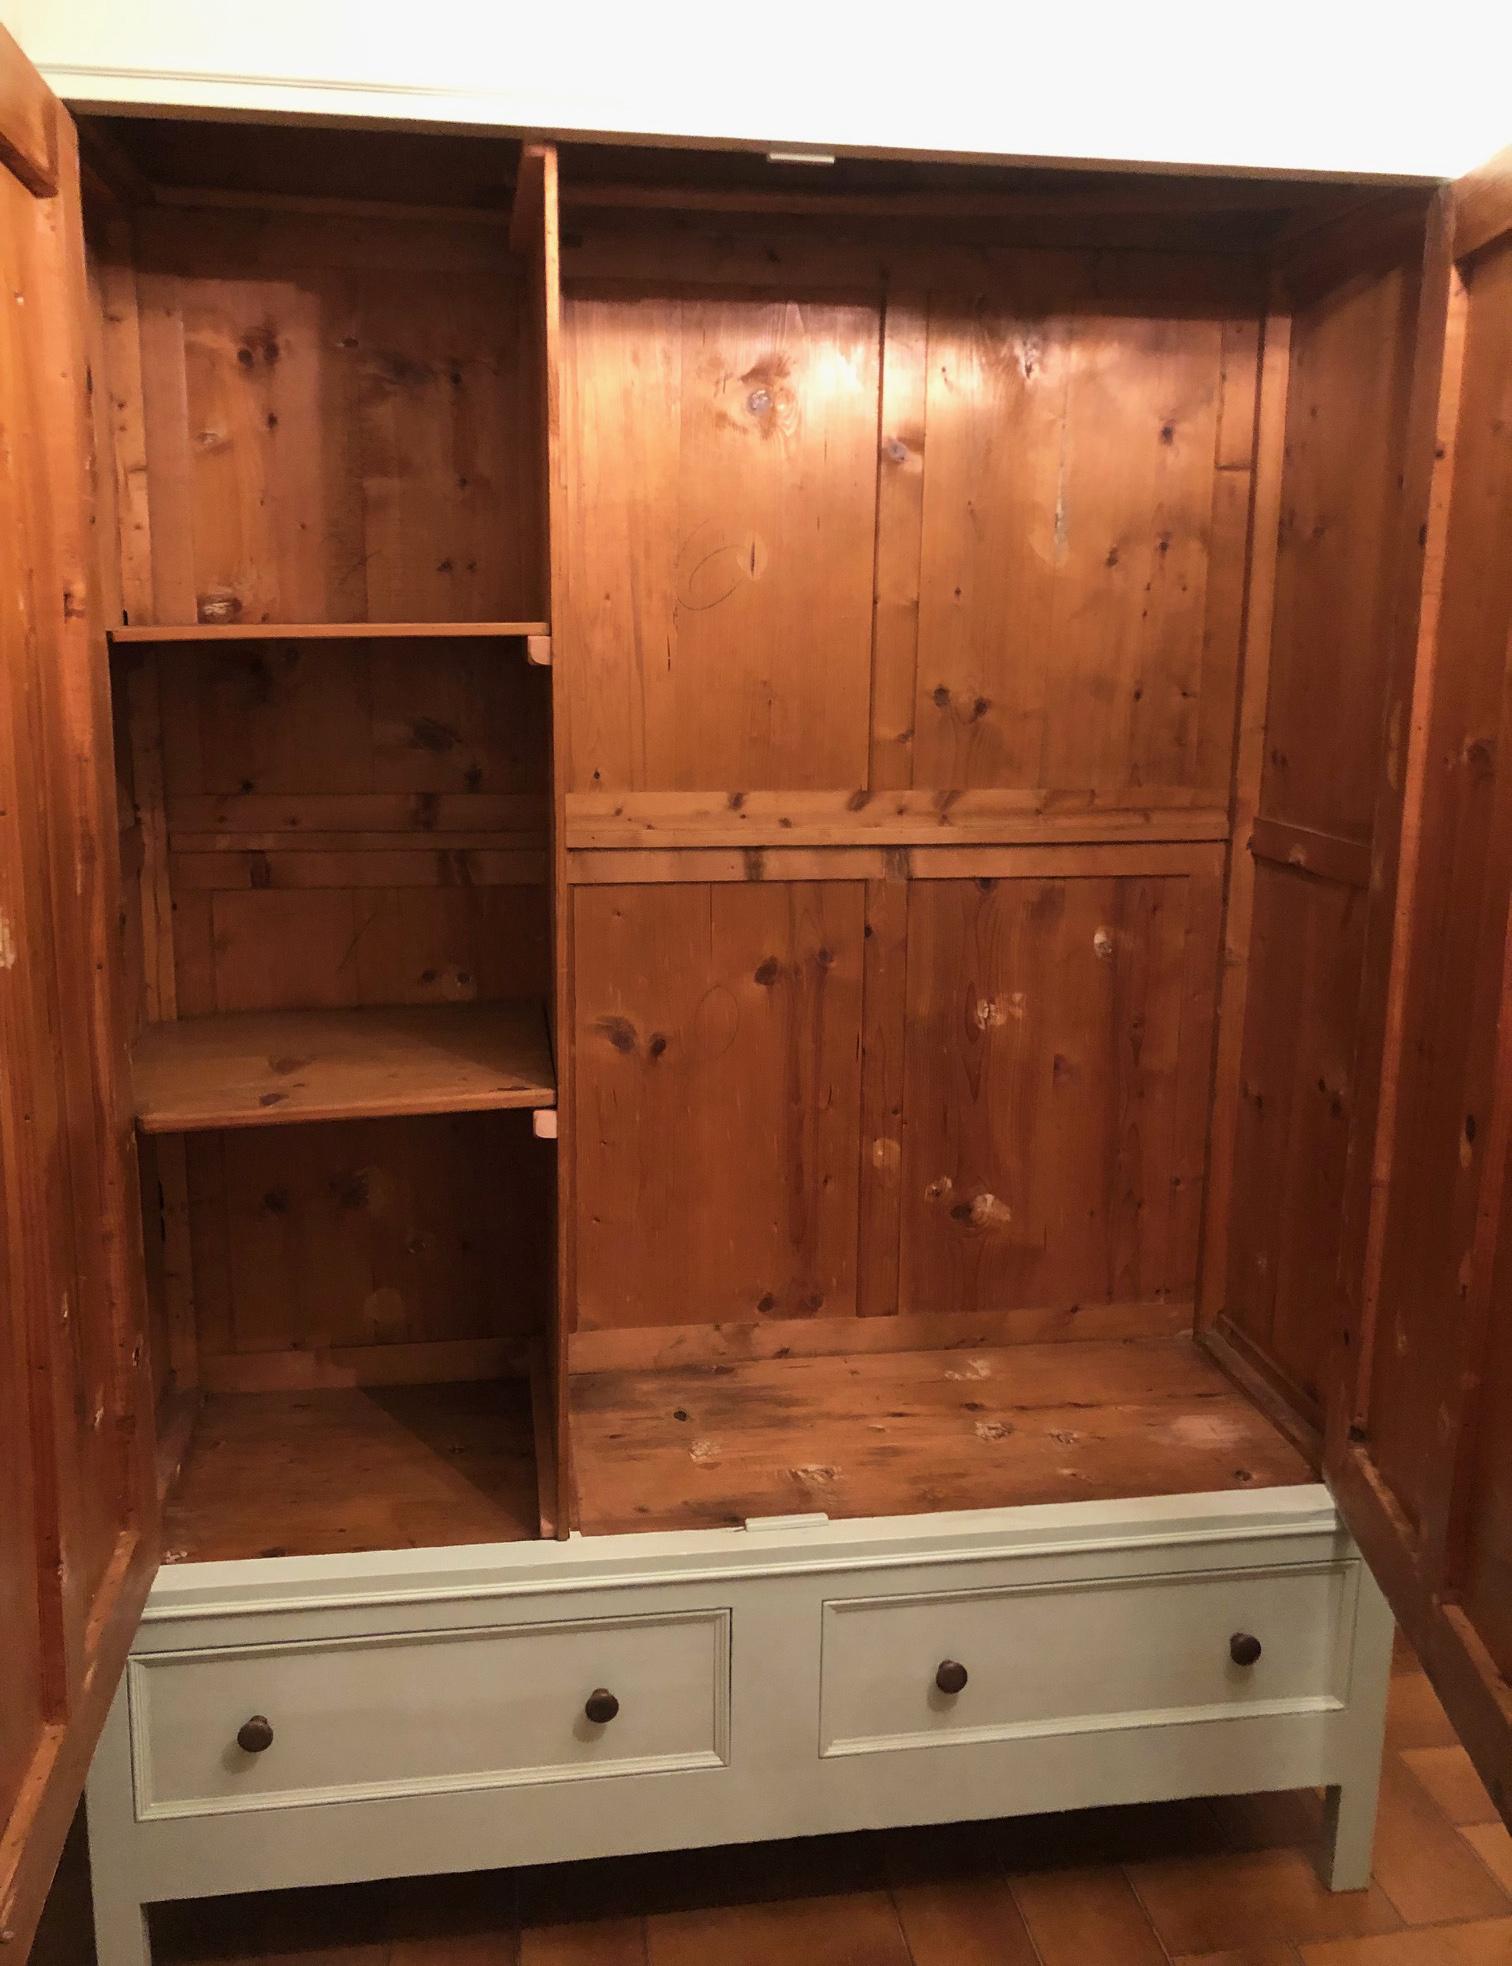 20th Century Tuscan light green two-door wardrobe with drawers.
The wardrobe is made of solid fir wood, completely dismantled into approximately 15 elements.
It is very robust and versatile.
It has two internal shelves on the left side and a clothes